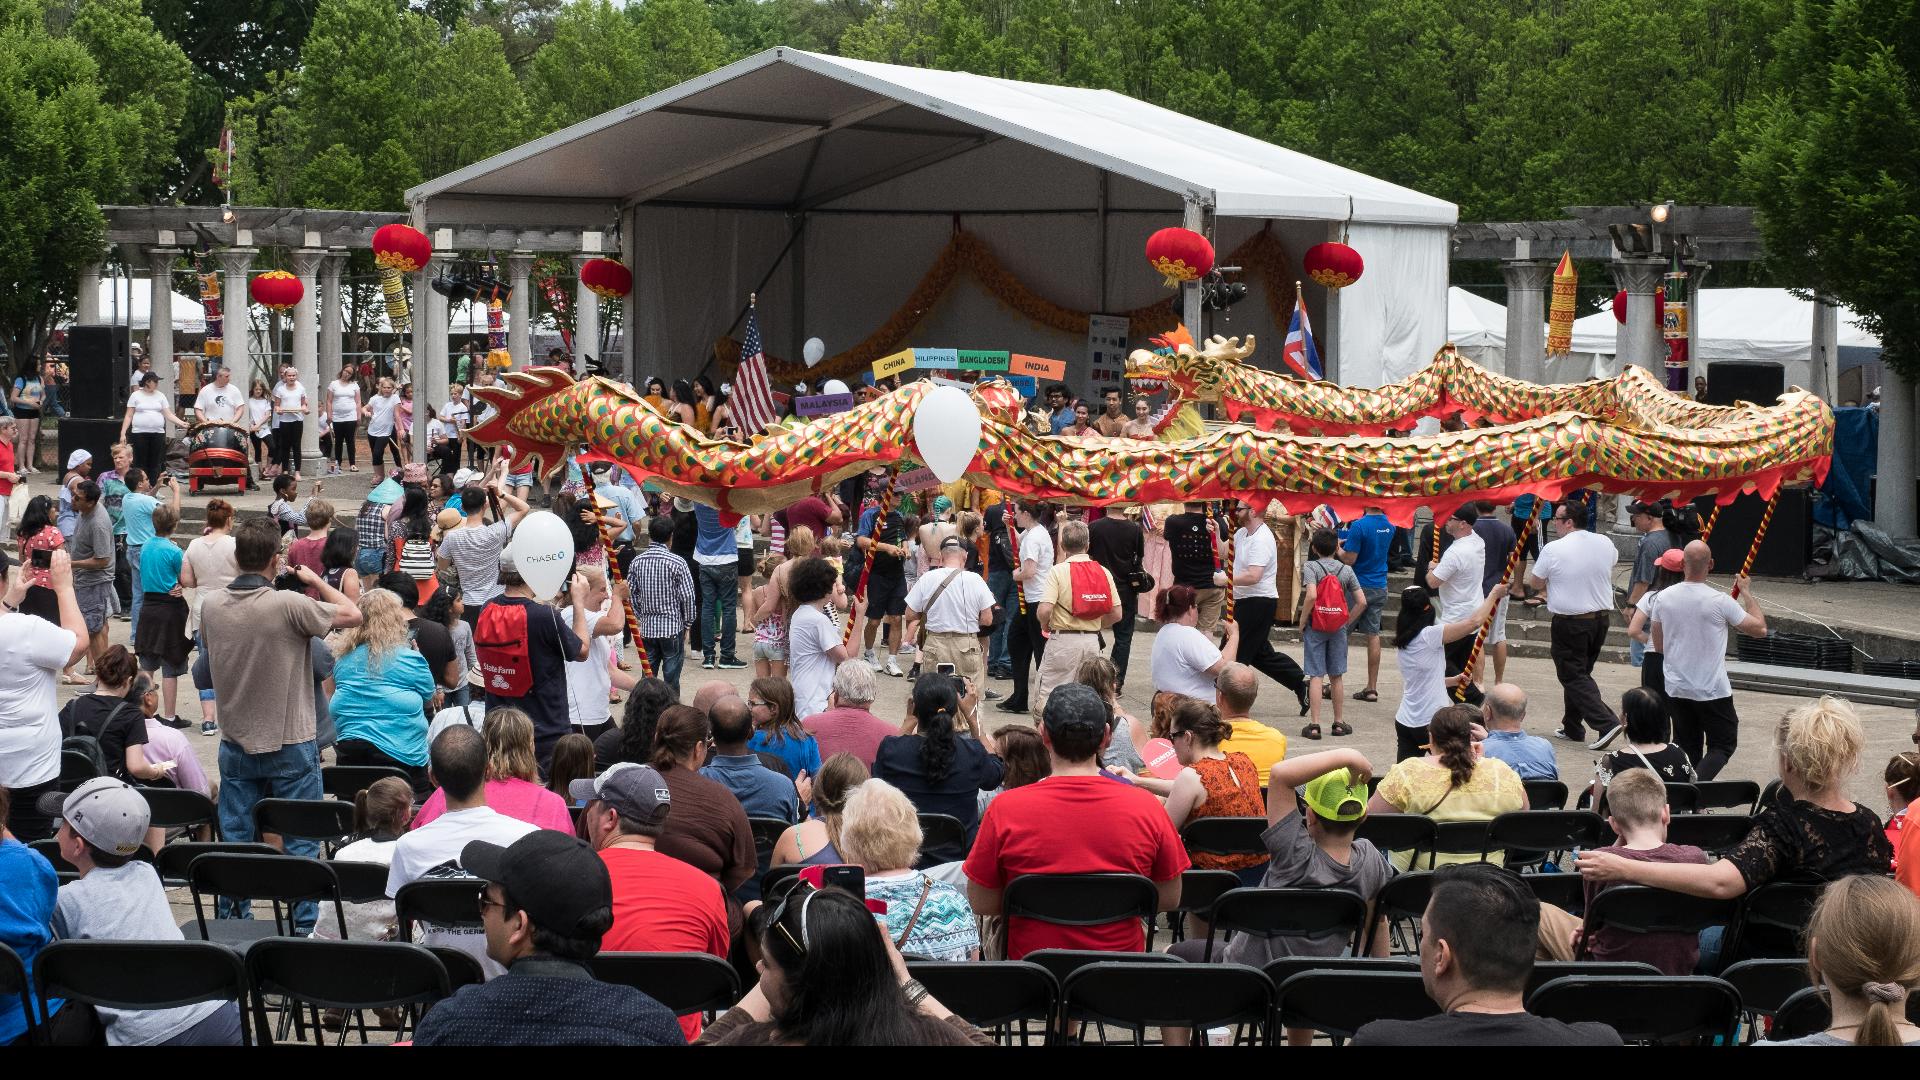 The two-day event features art demonstrations, Tai chi martial arts workshops, entertainment, vendors and food.